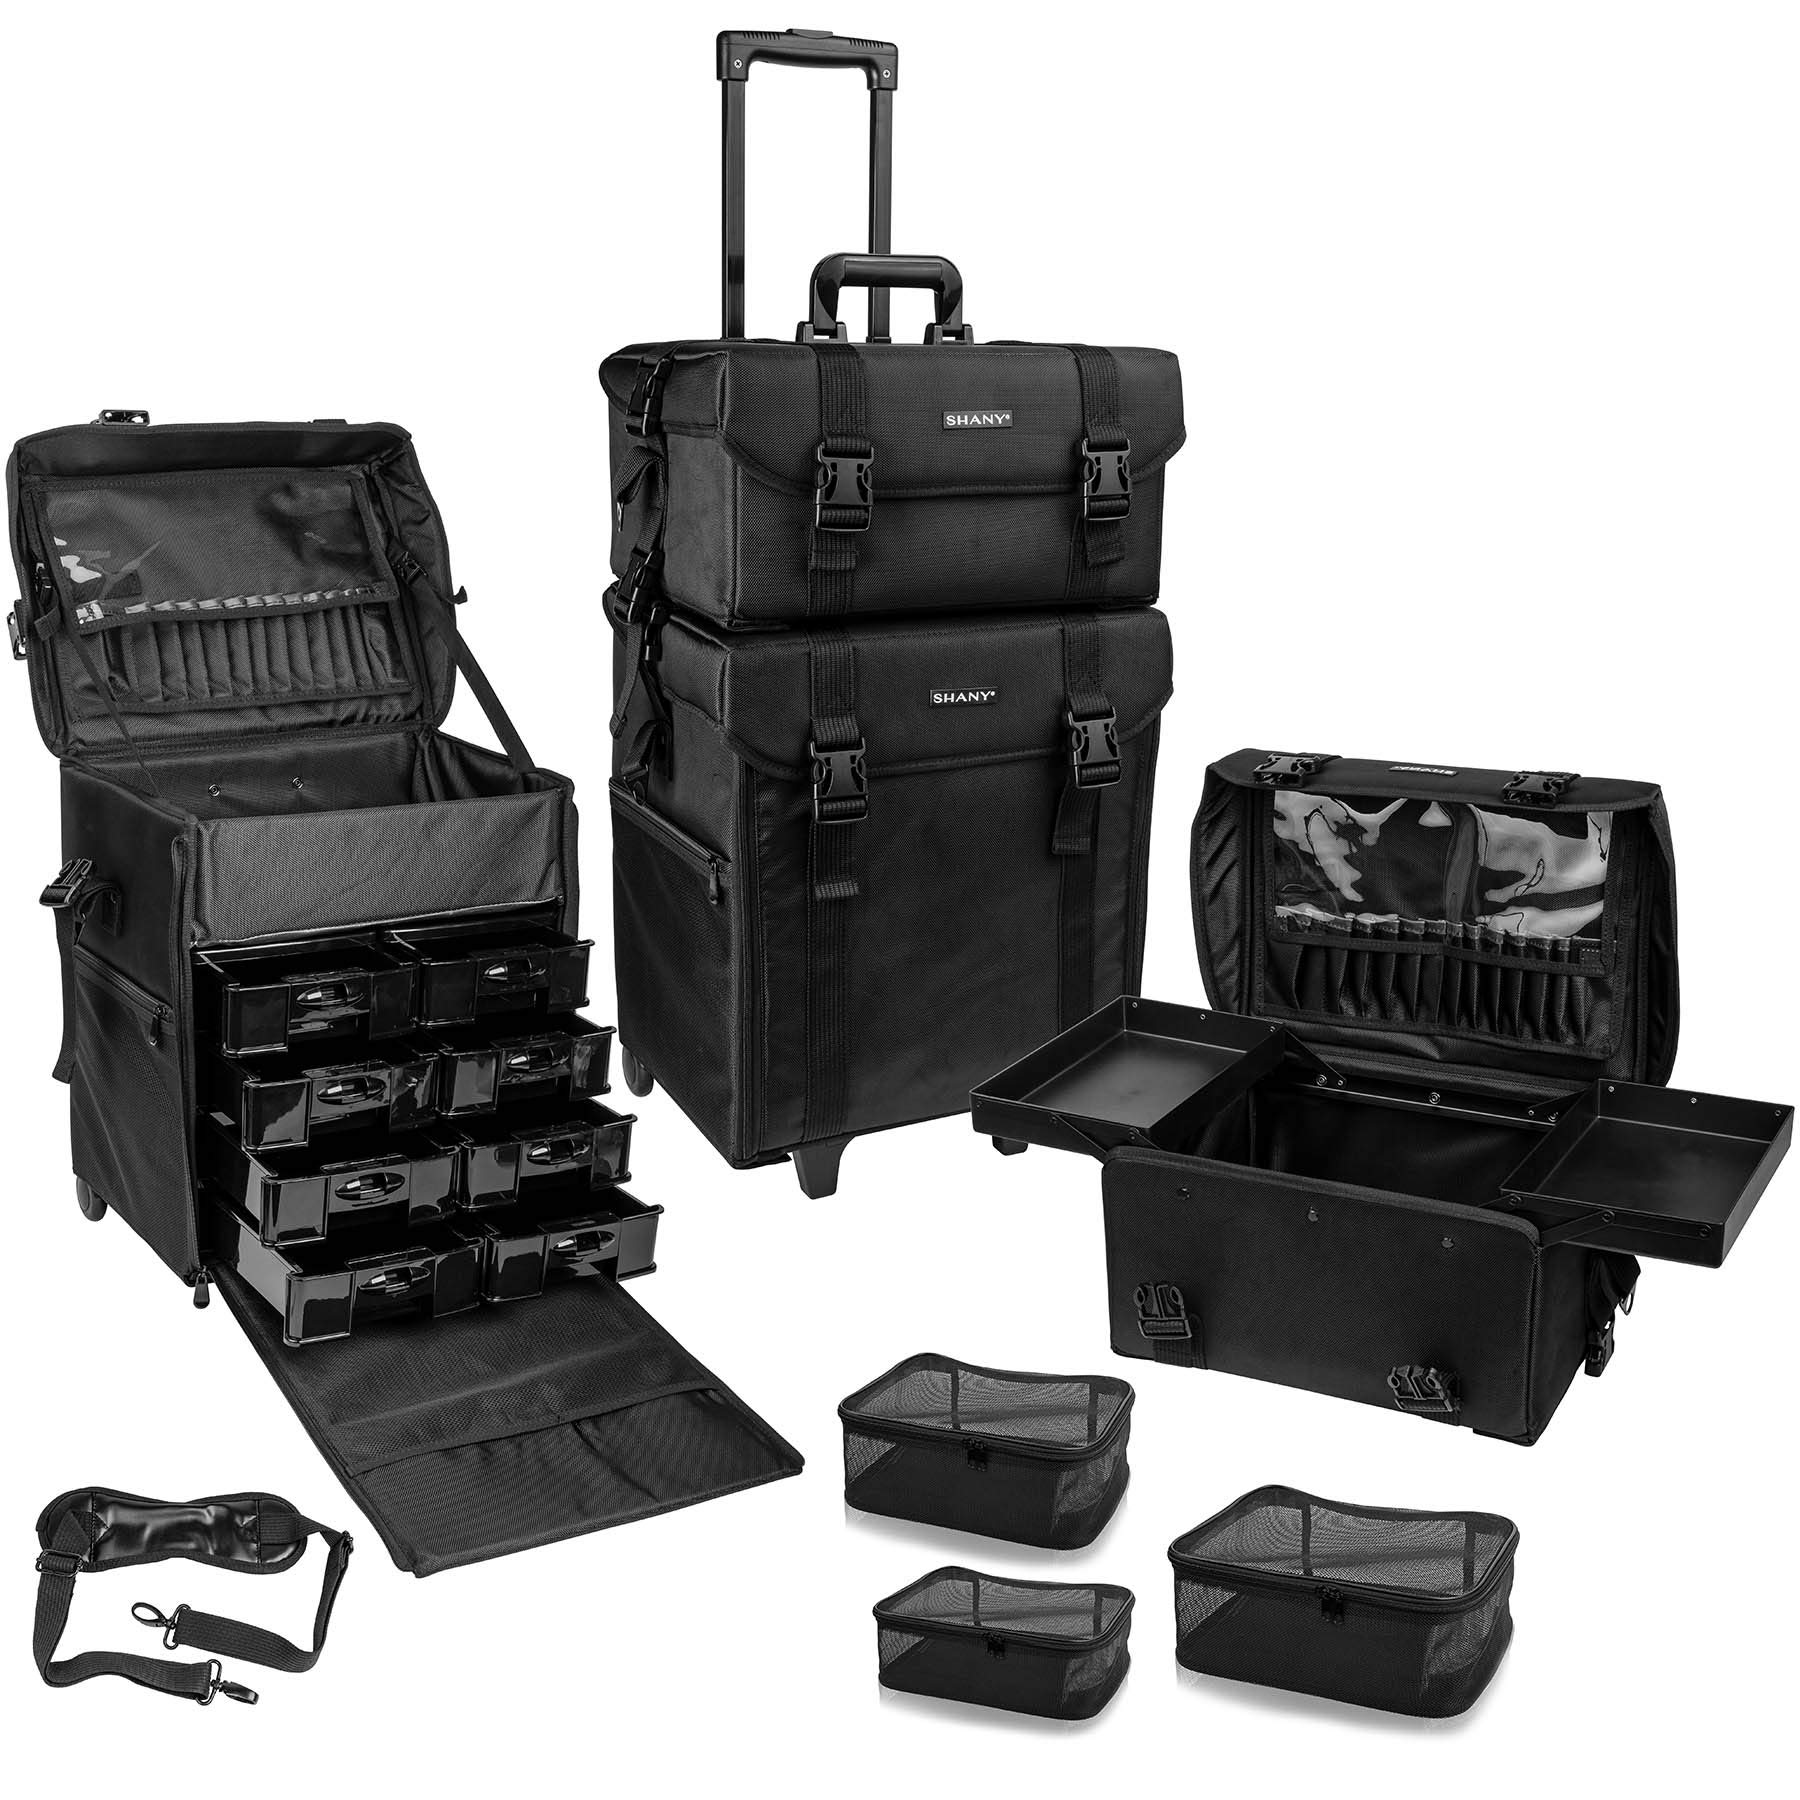 SHANY Soft Makeup Artist Rolling Trolley Cosmetic Case with Free Set of Mesh Bags - Jet Black